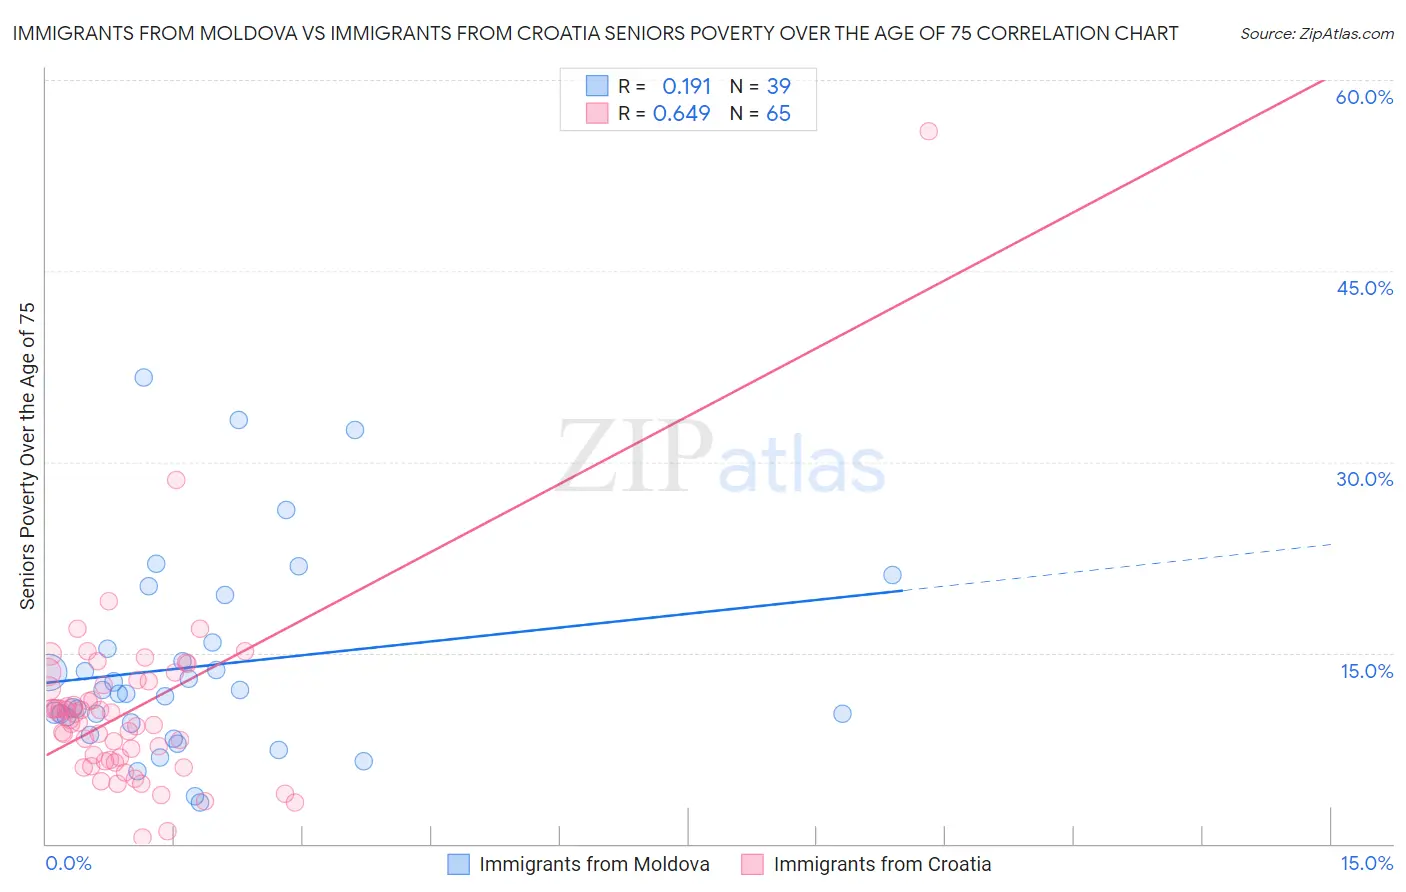 Immigrants from Moldova vs Immigrants from Croatia Seniors Poverty Over the Age of 75